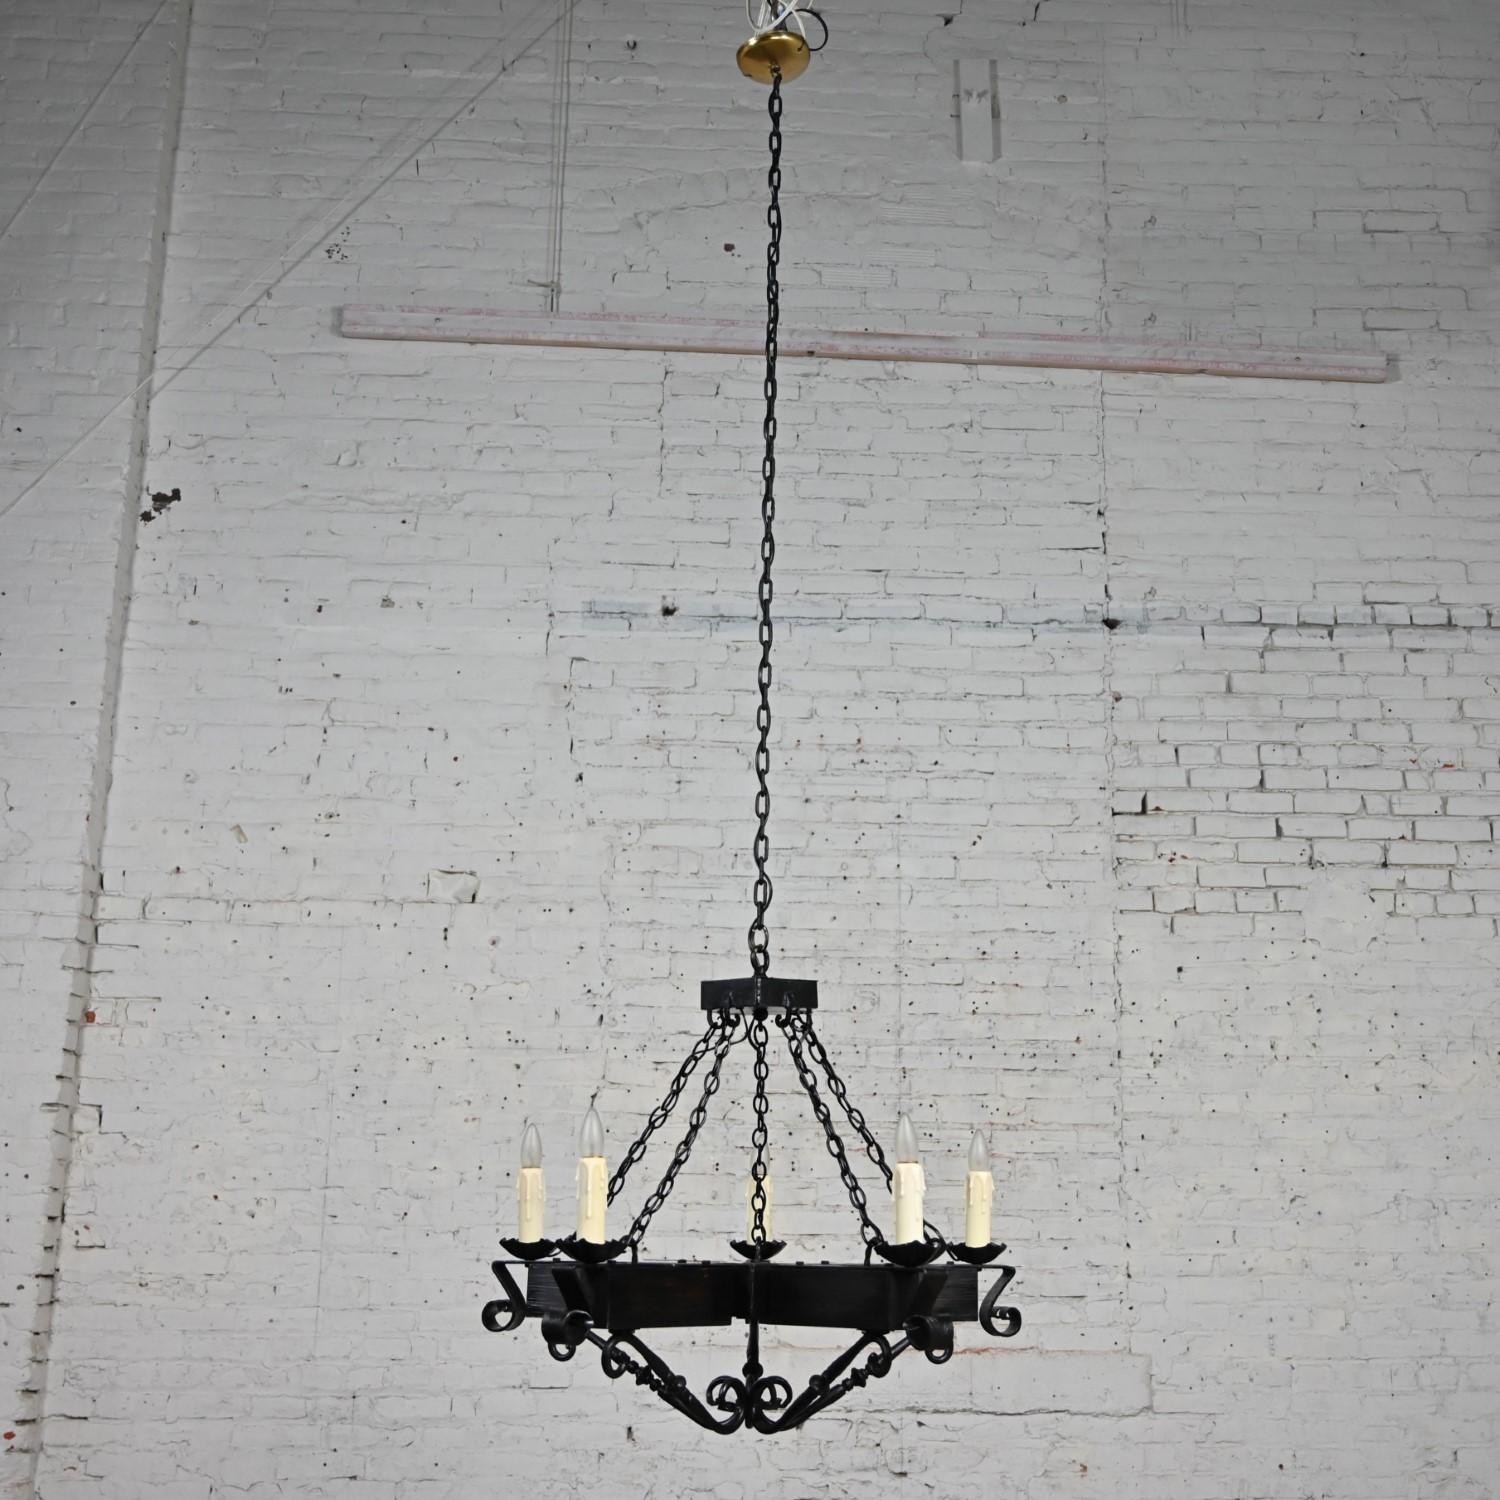 John C Virden Medieval Gothic or Spanish Revival Style Hanging Light Fixture  In Good Condition For Sale In Topeka, KS